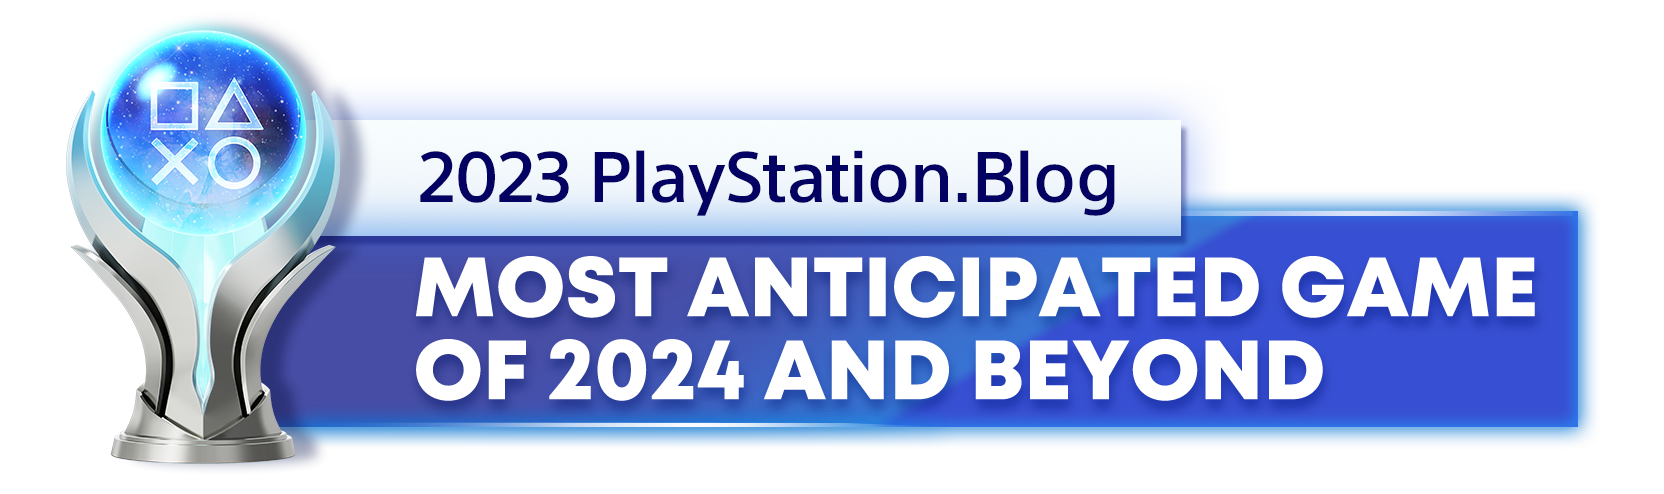  "Platinum Trophy for the 2023 PlayStation Blog Most Anticipated PlayStation Game of 2024 and Beyond Winner"